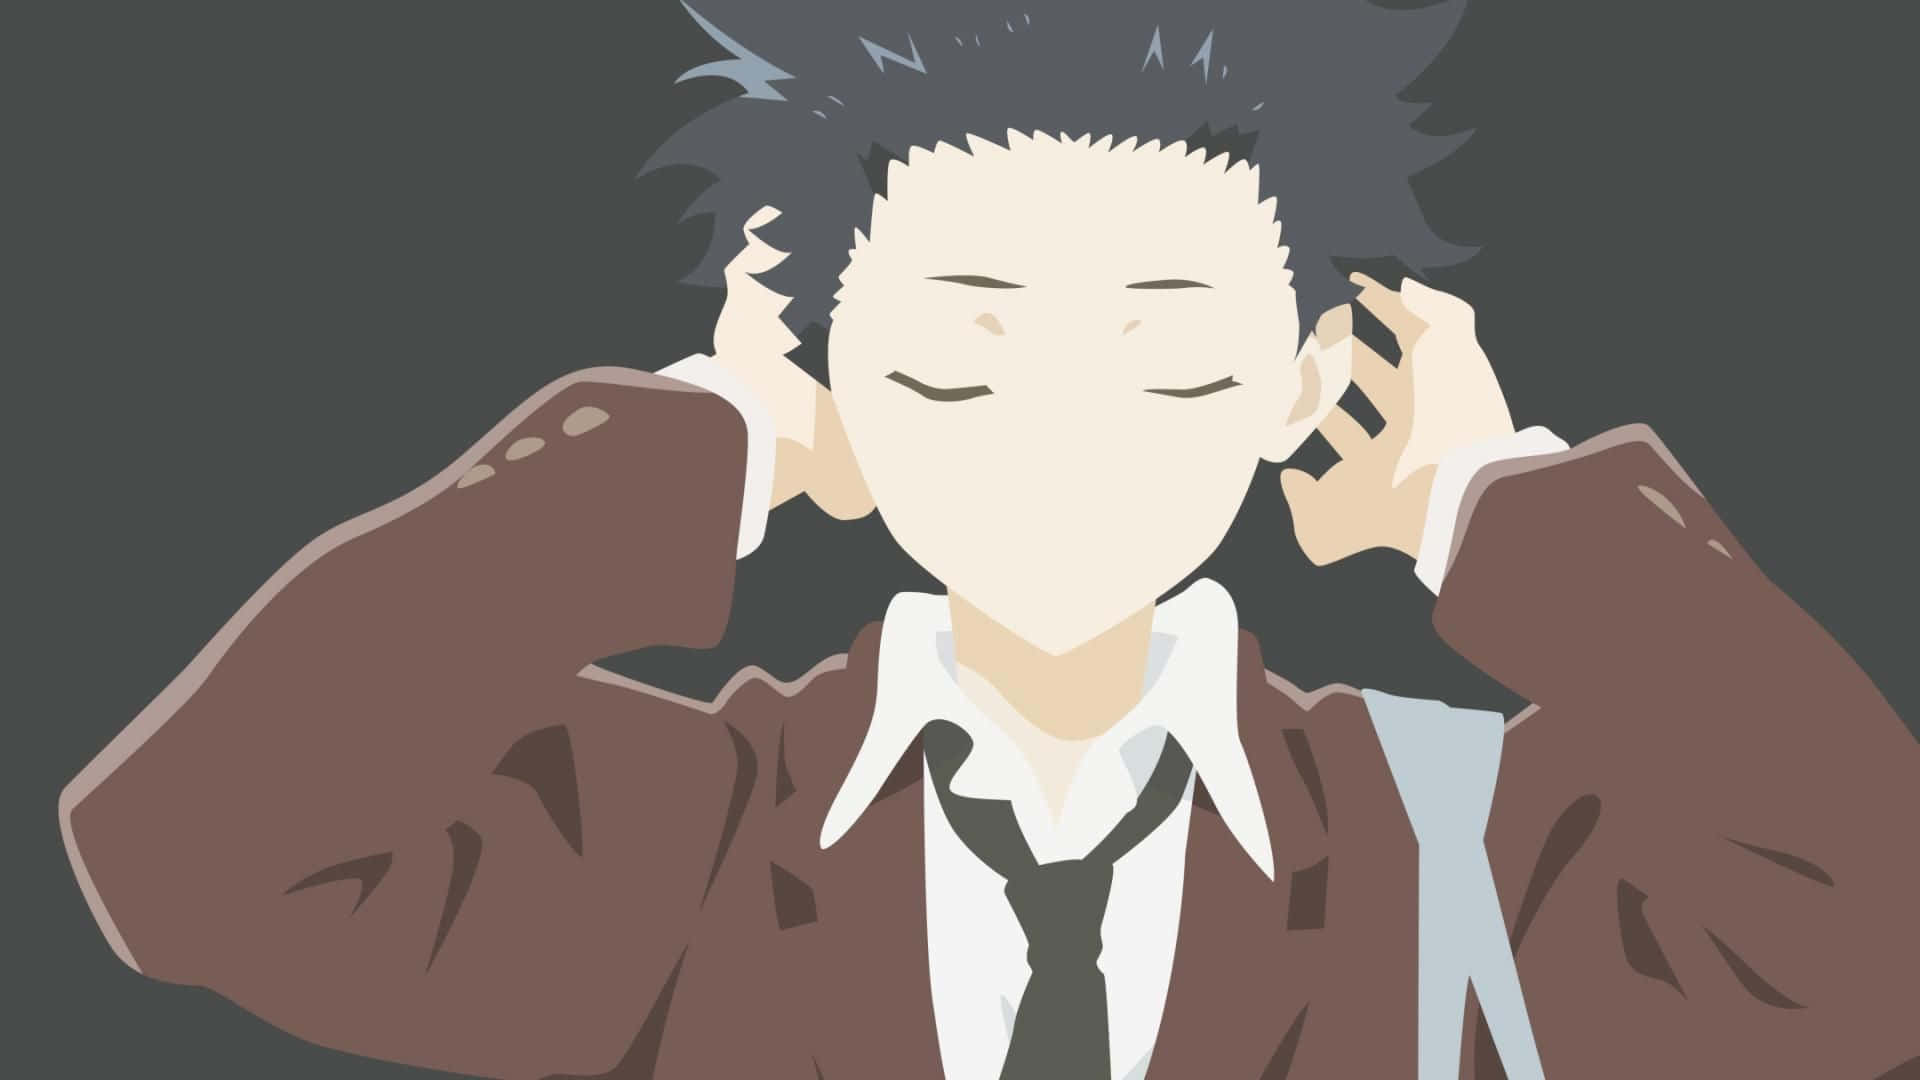 'A Silent Voice' - the journey of understanding and learning